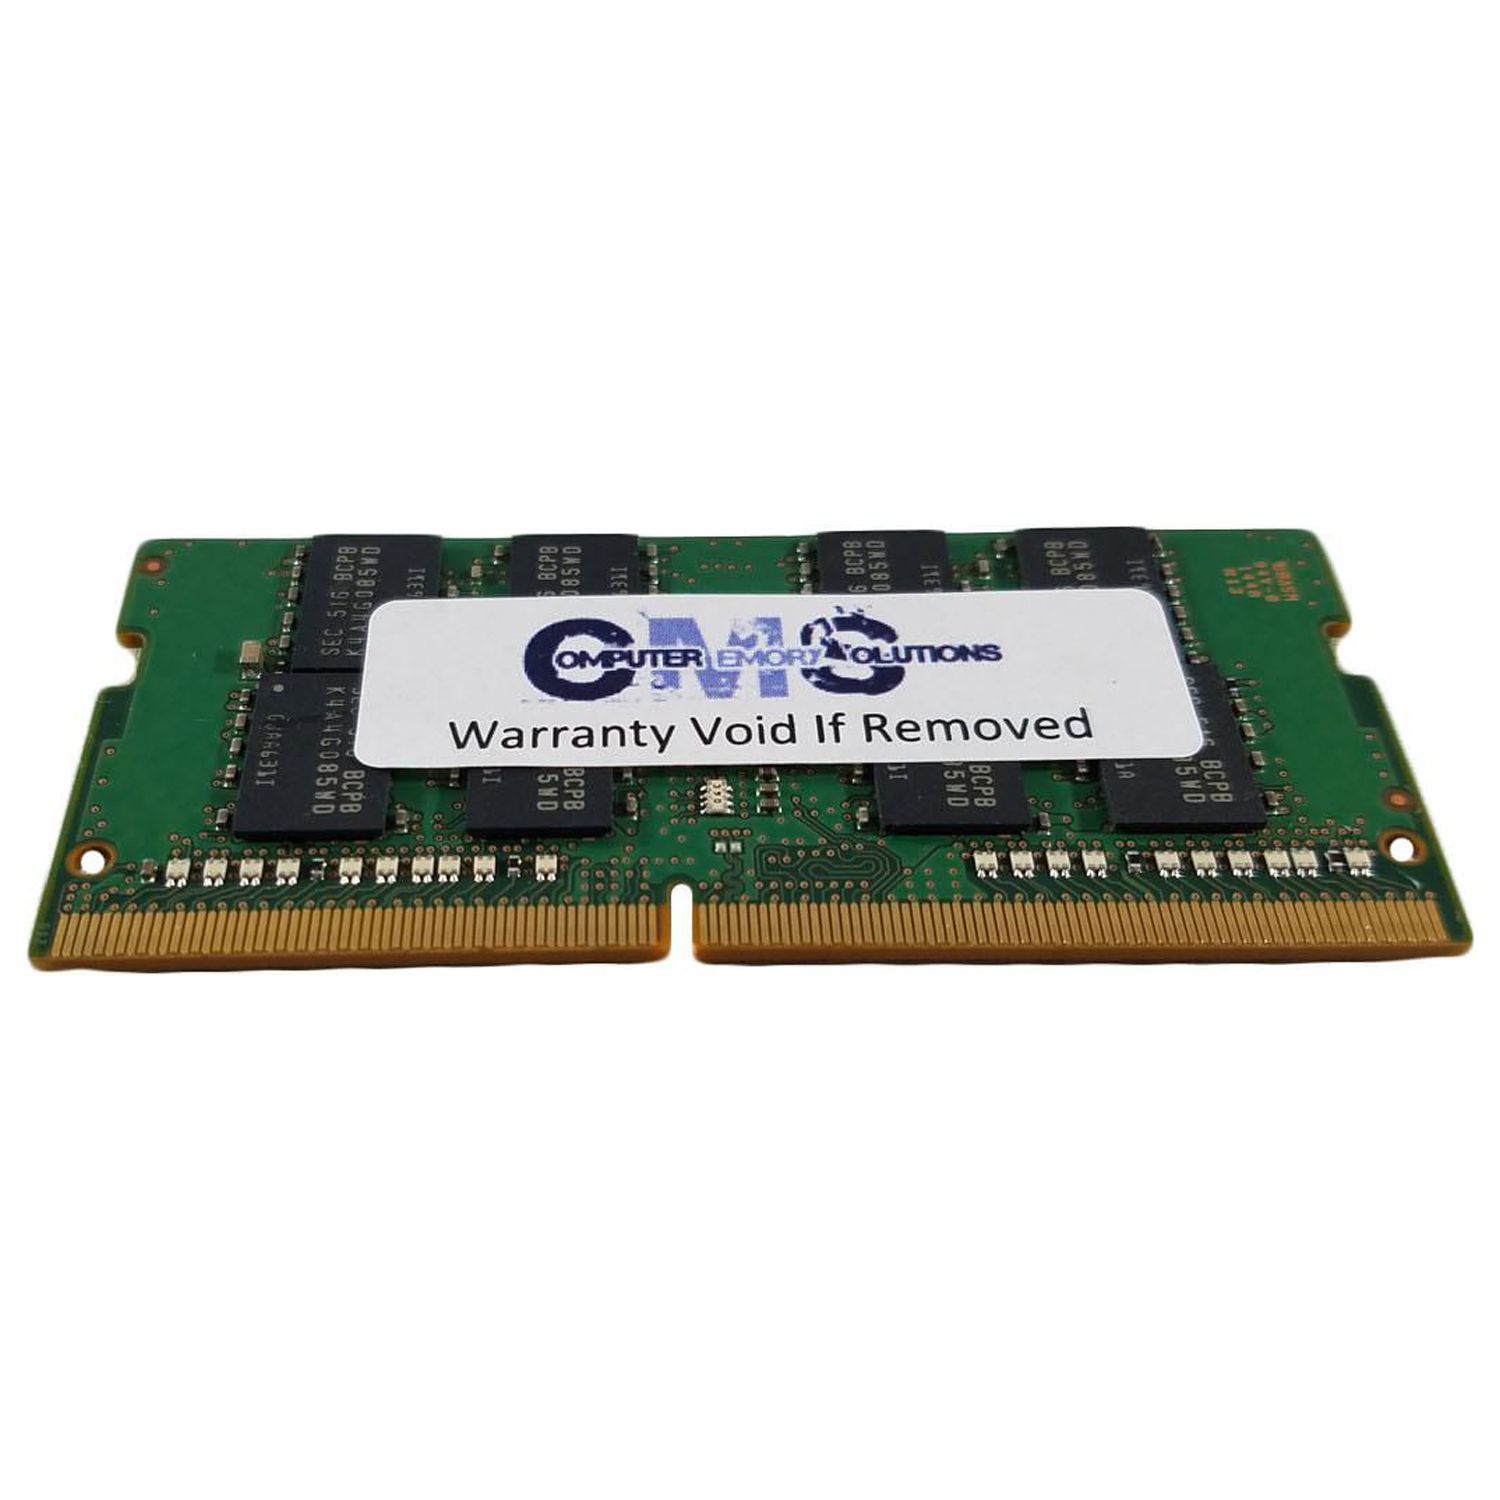 CMS 16GB (1X16GB) DDR4 21300 2666MHZ NON ECC SODIMM Memory Ram Compatible with Dell G3 15 (3579) Gaming, G3 17 (3779) Gaming - D35 - image 2 of 3